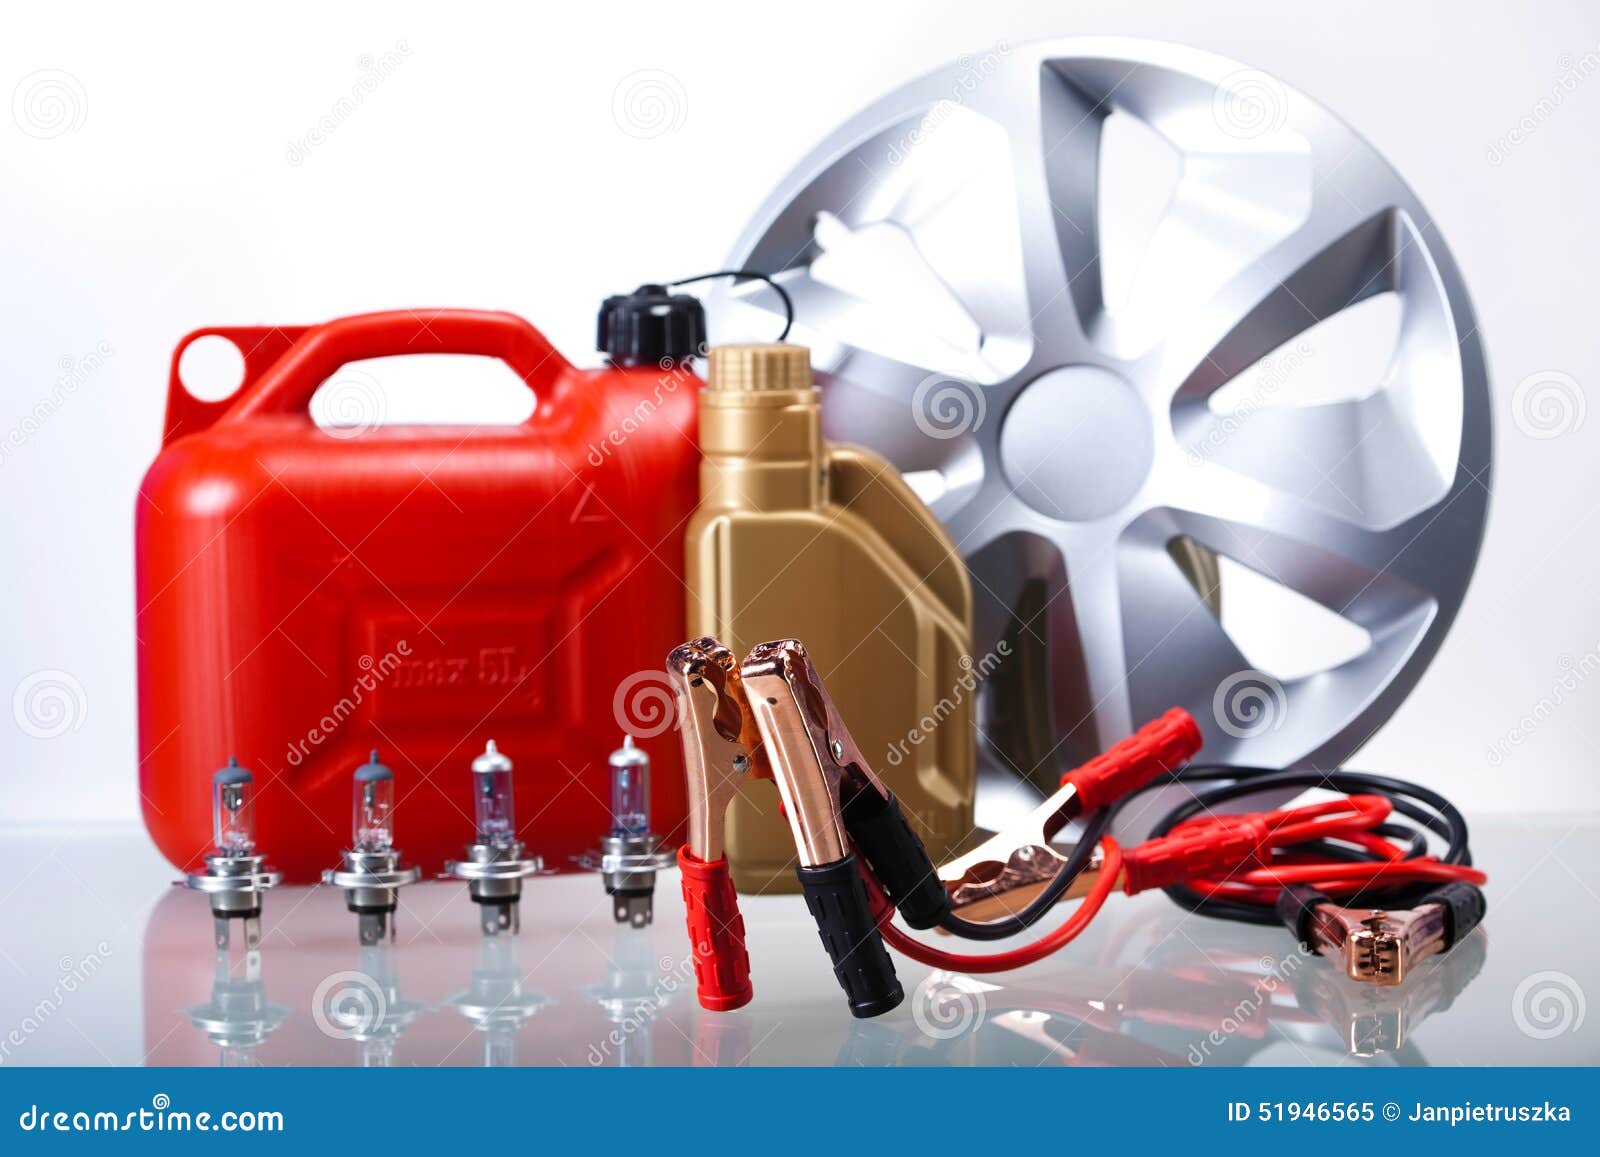 Set of Auto Parts, Car Battery on Moto Concept Stock Image - Image of background, parts: 51946565